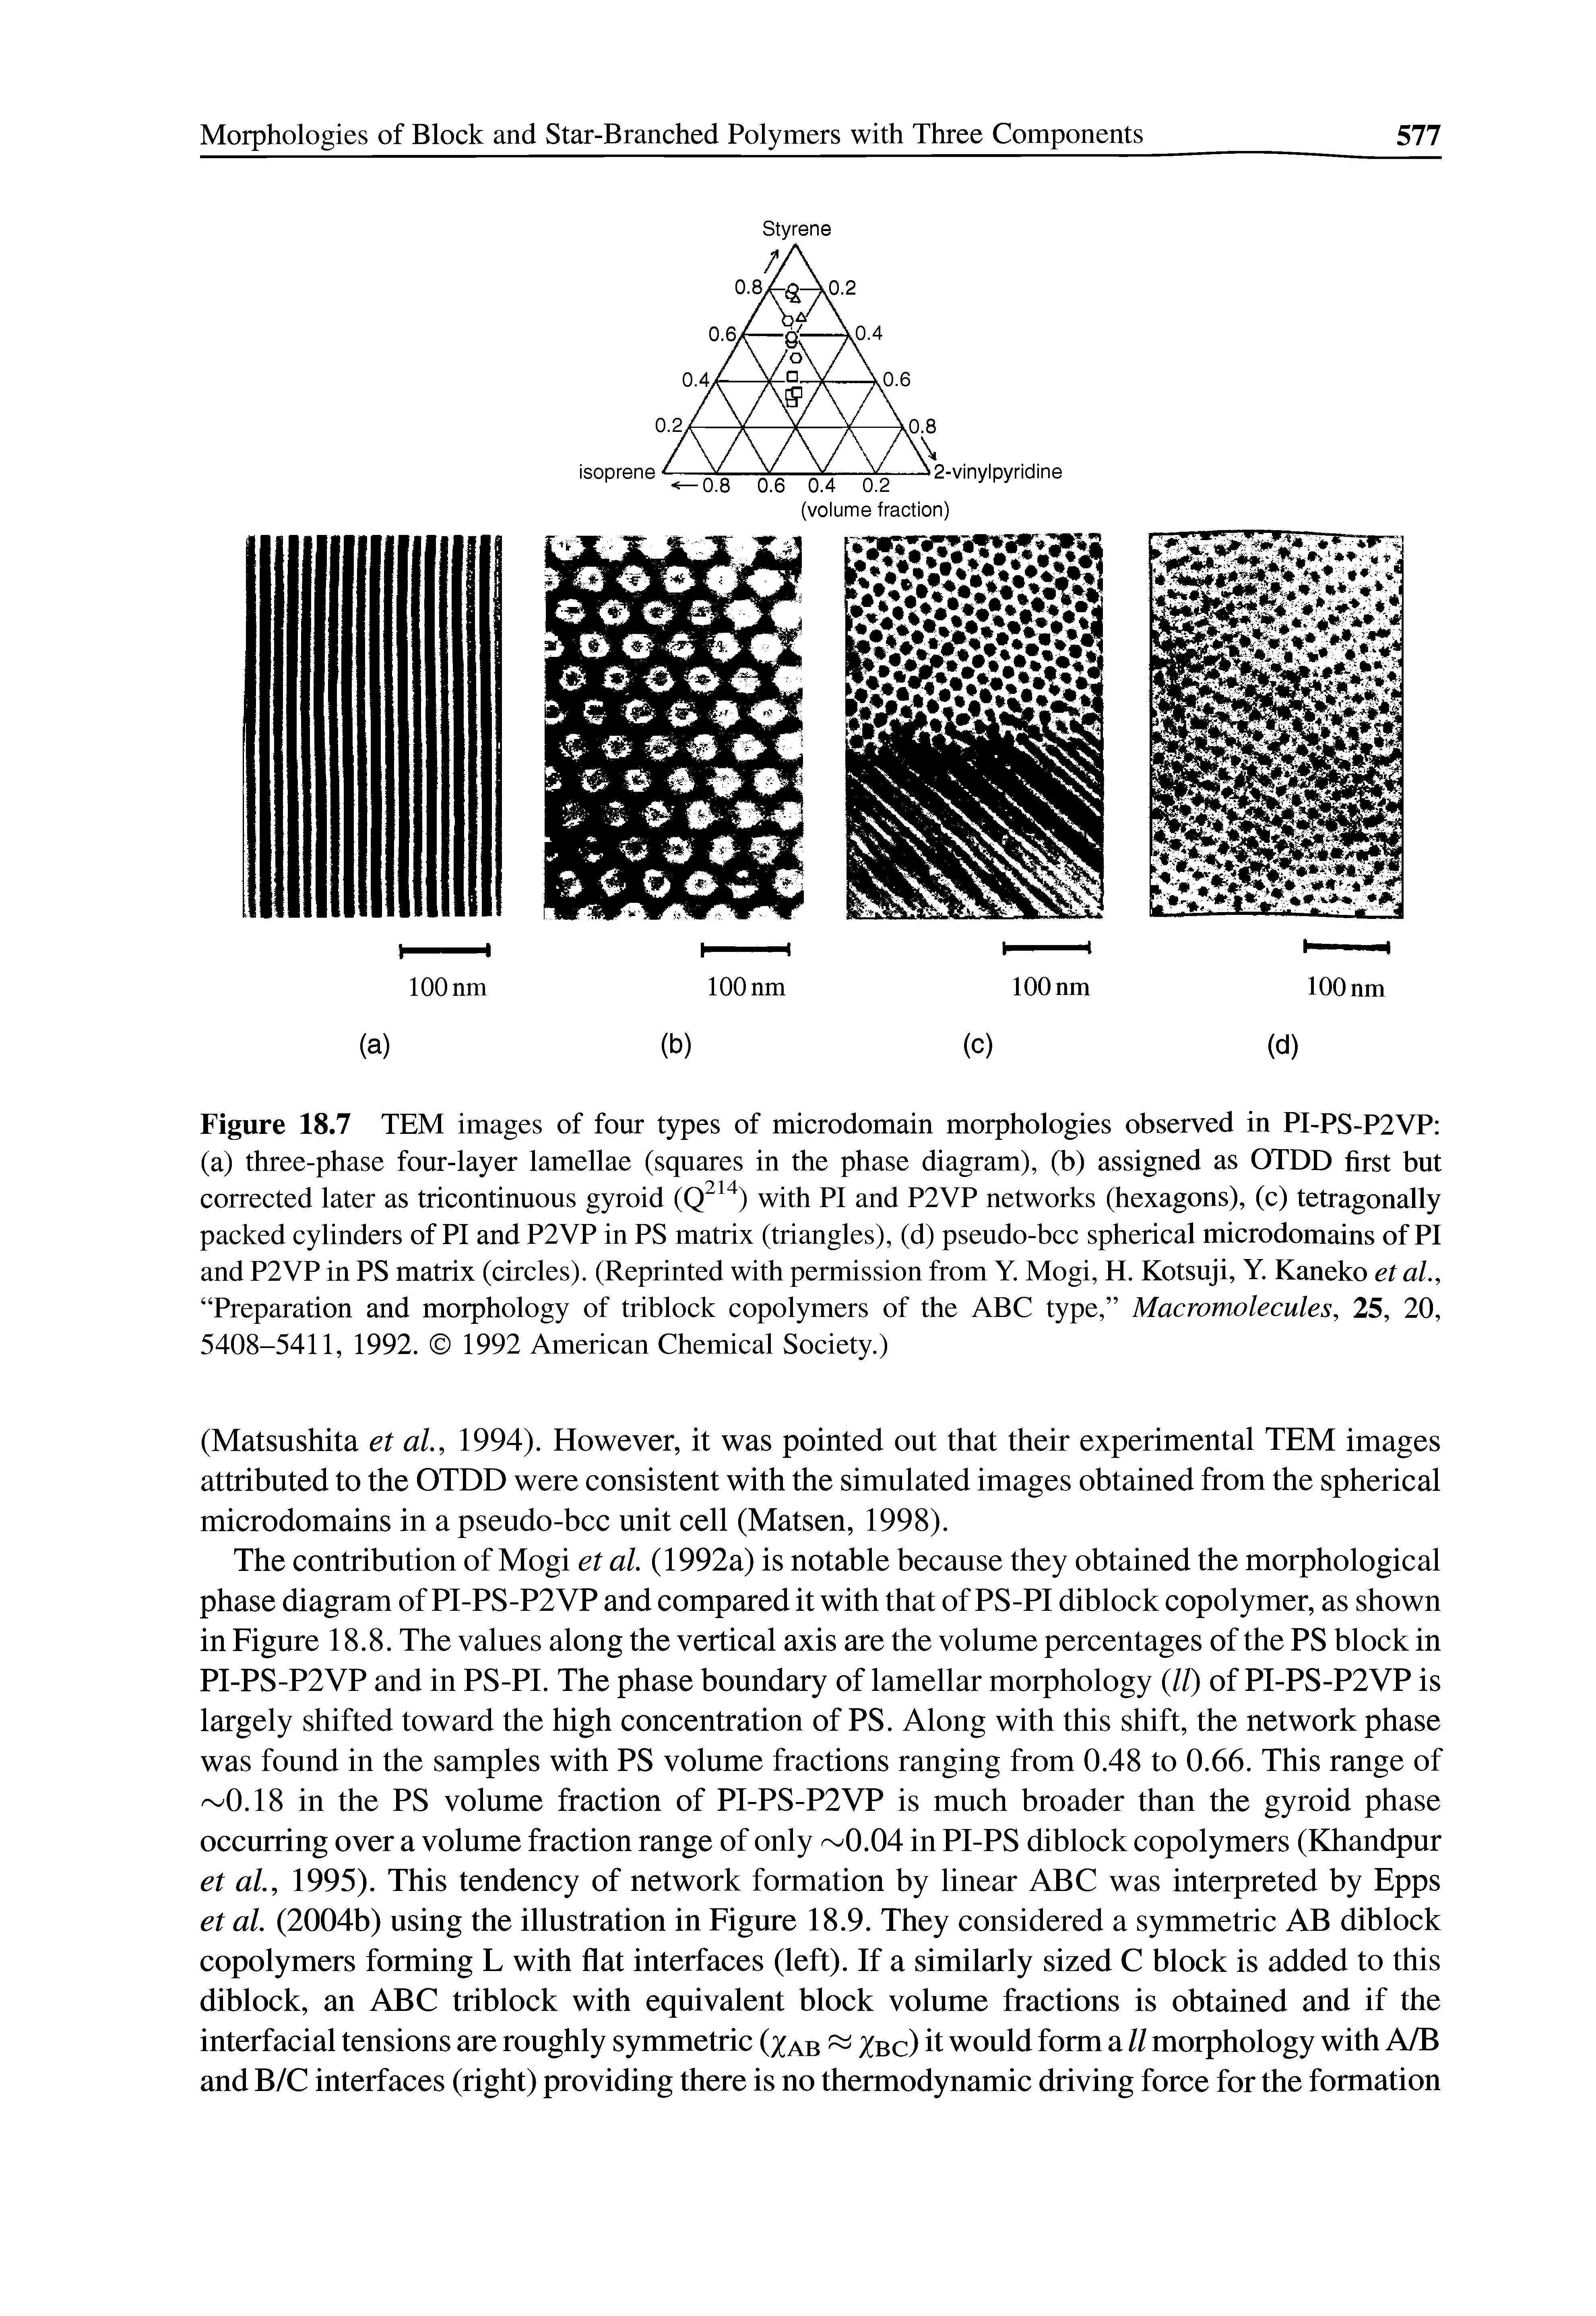 Figure 18.7 TEM images of four types of microdomain morphologies observed in PI-PS-P2VP (a) three-phase four-layer lamellae (squares in the phase diagram), (b) assigned as OTDD first but corrected later as tricontinuous gyroid with PI and P2VP networks (hexagons), (c) tetragonally...